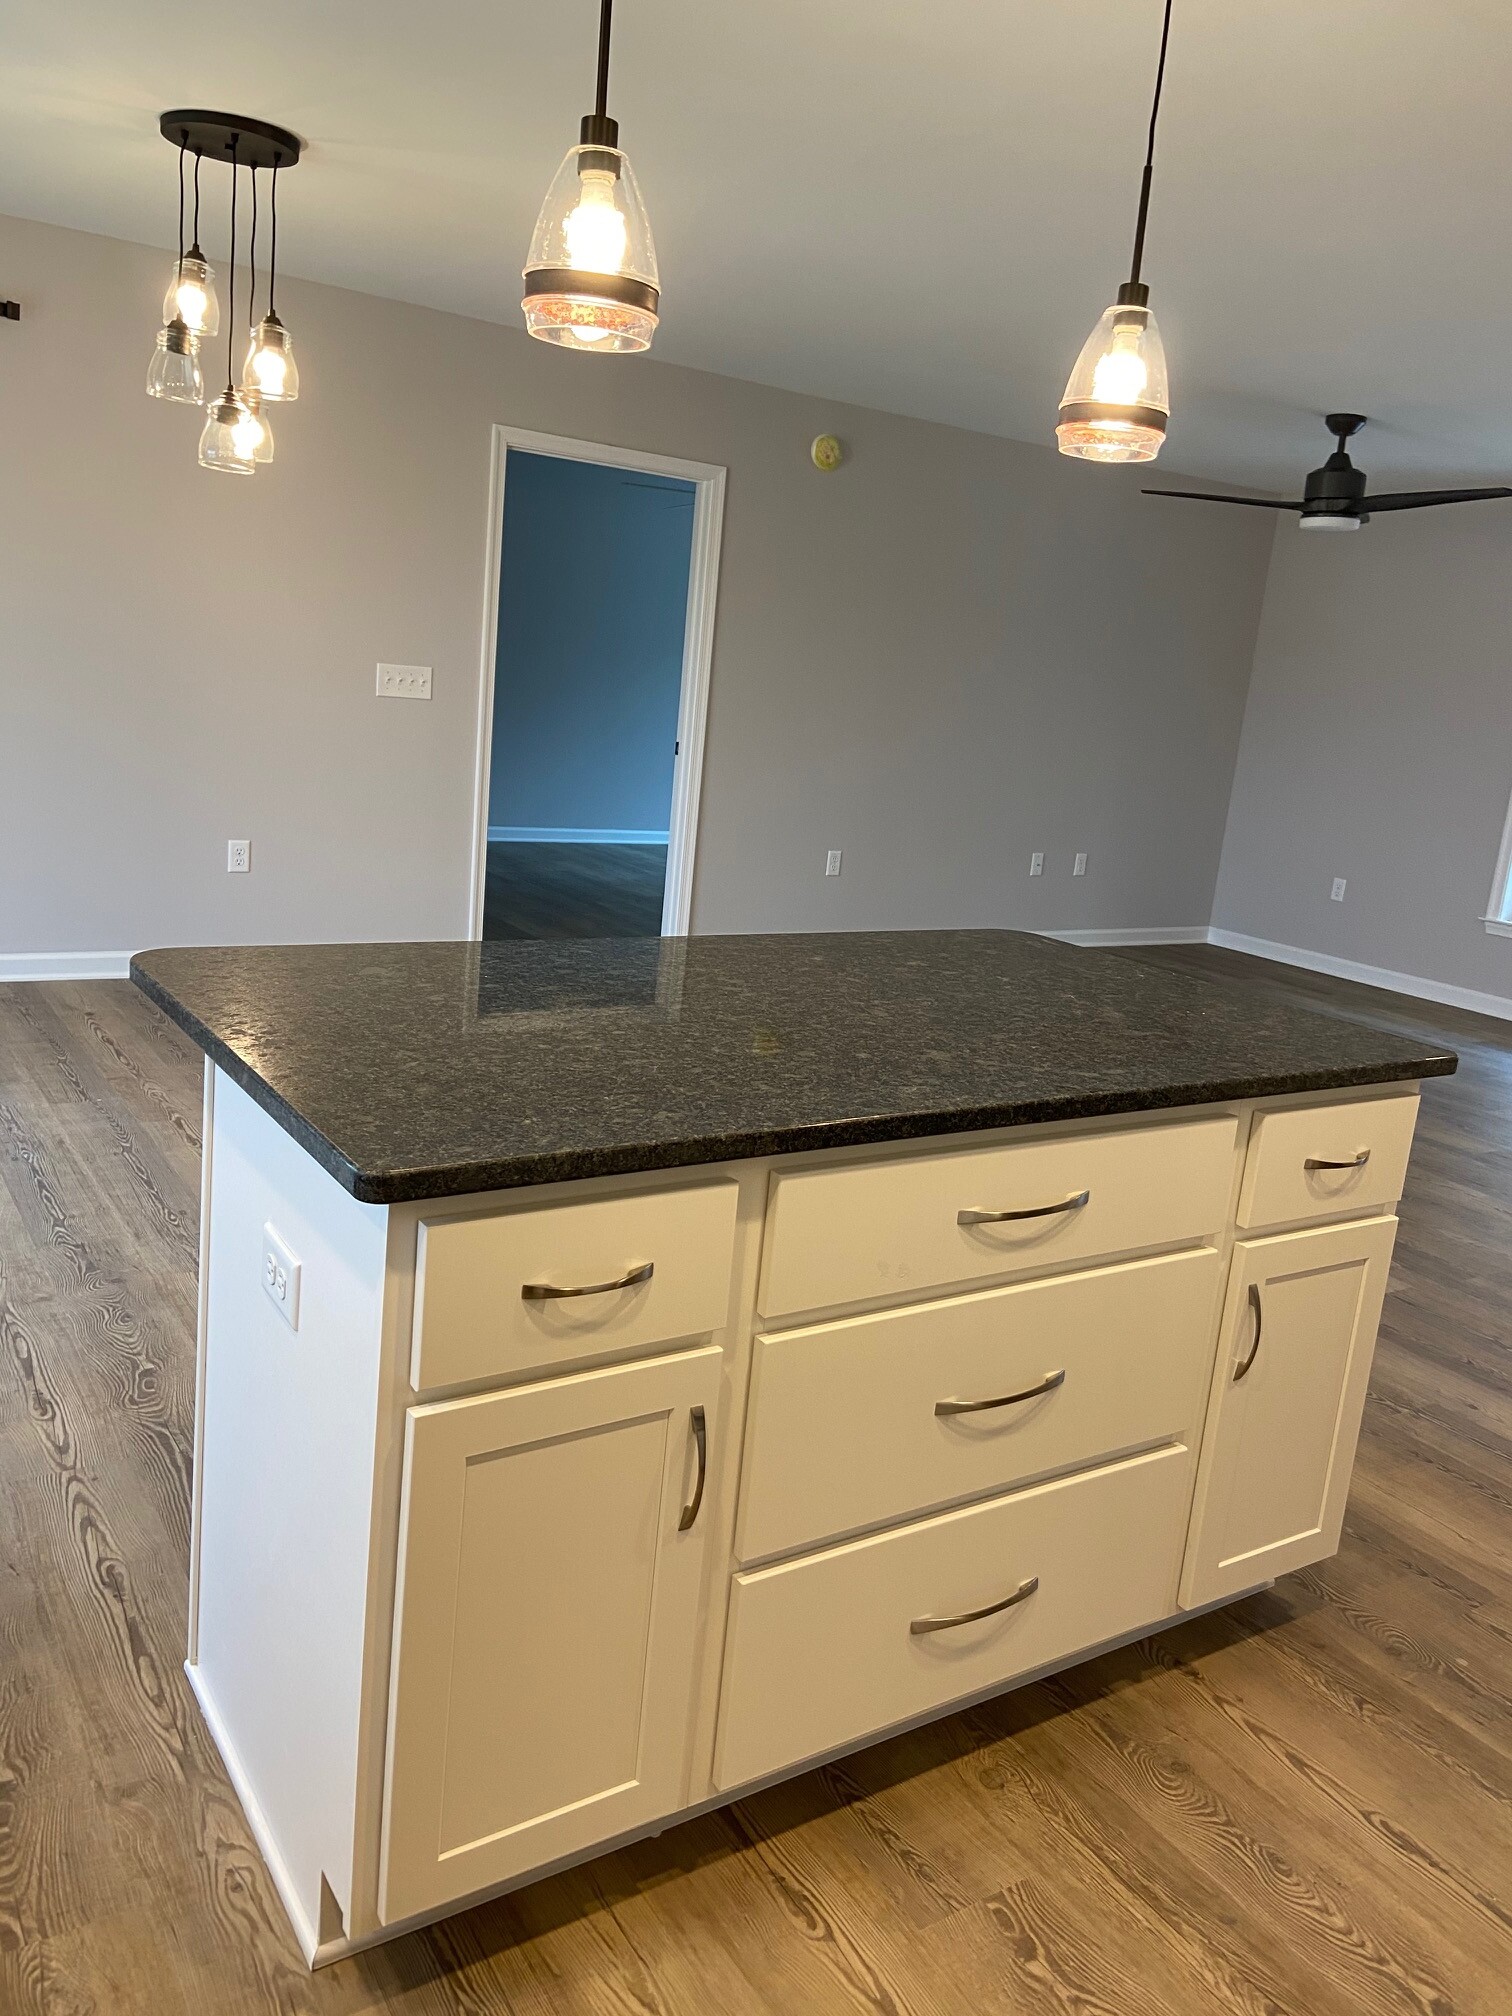 New Homes, kitchen, Seely Homes, Delaware